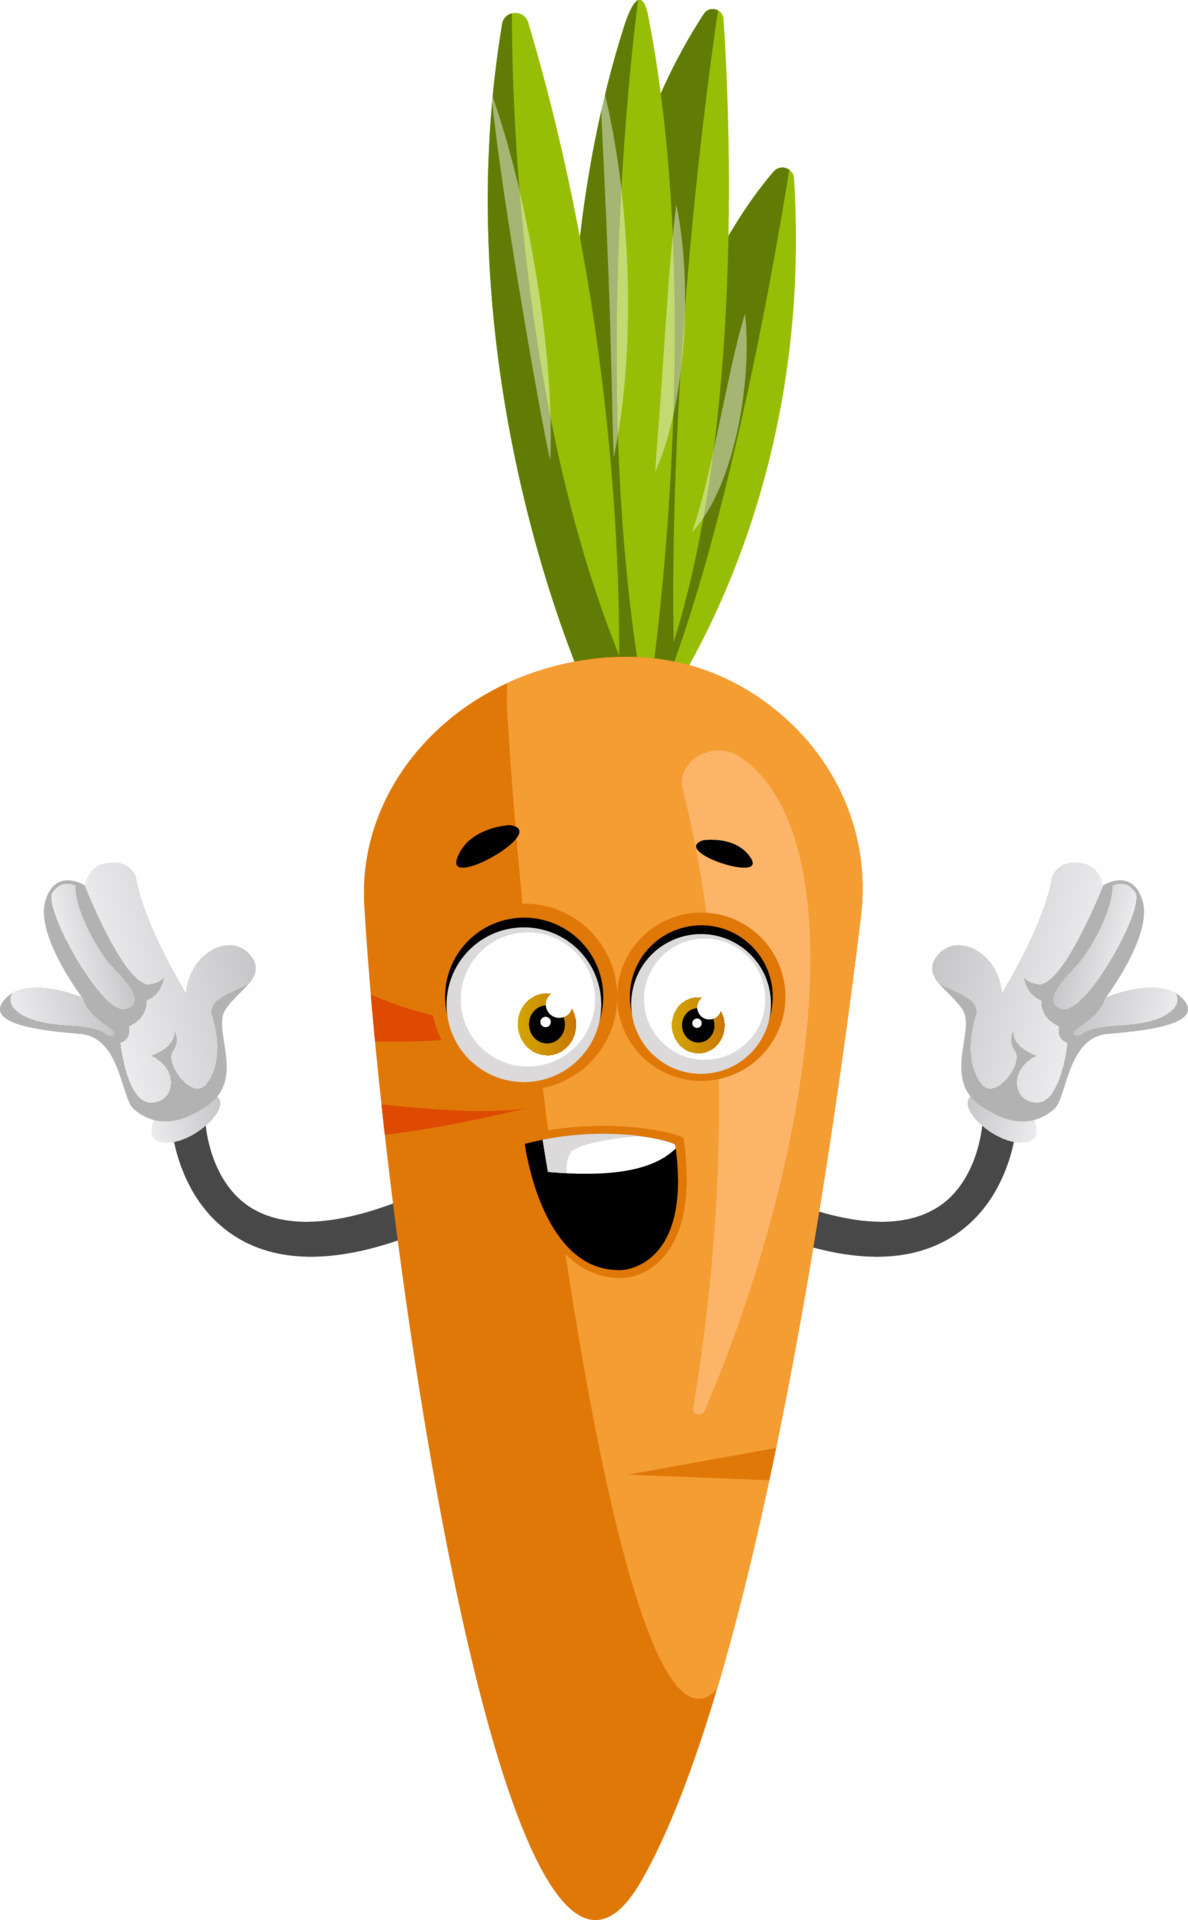 Happy Carrot Illustration Vector On White Background 13723334 Vector